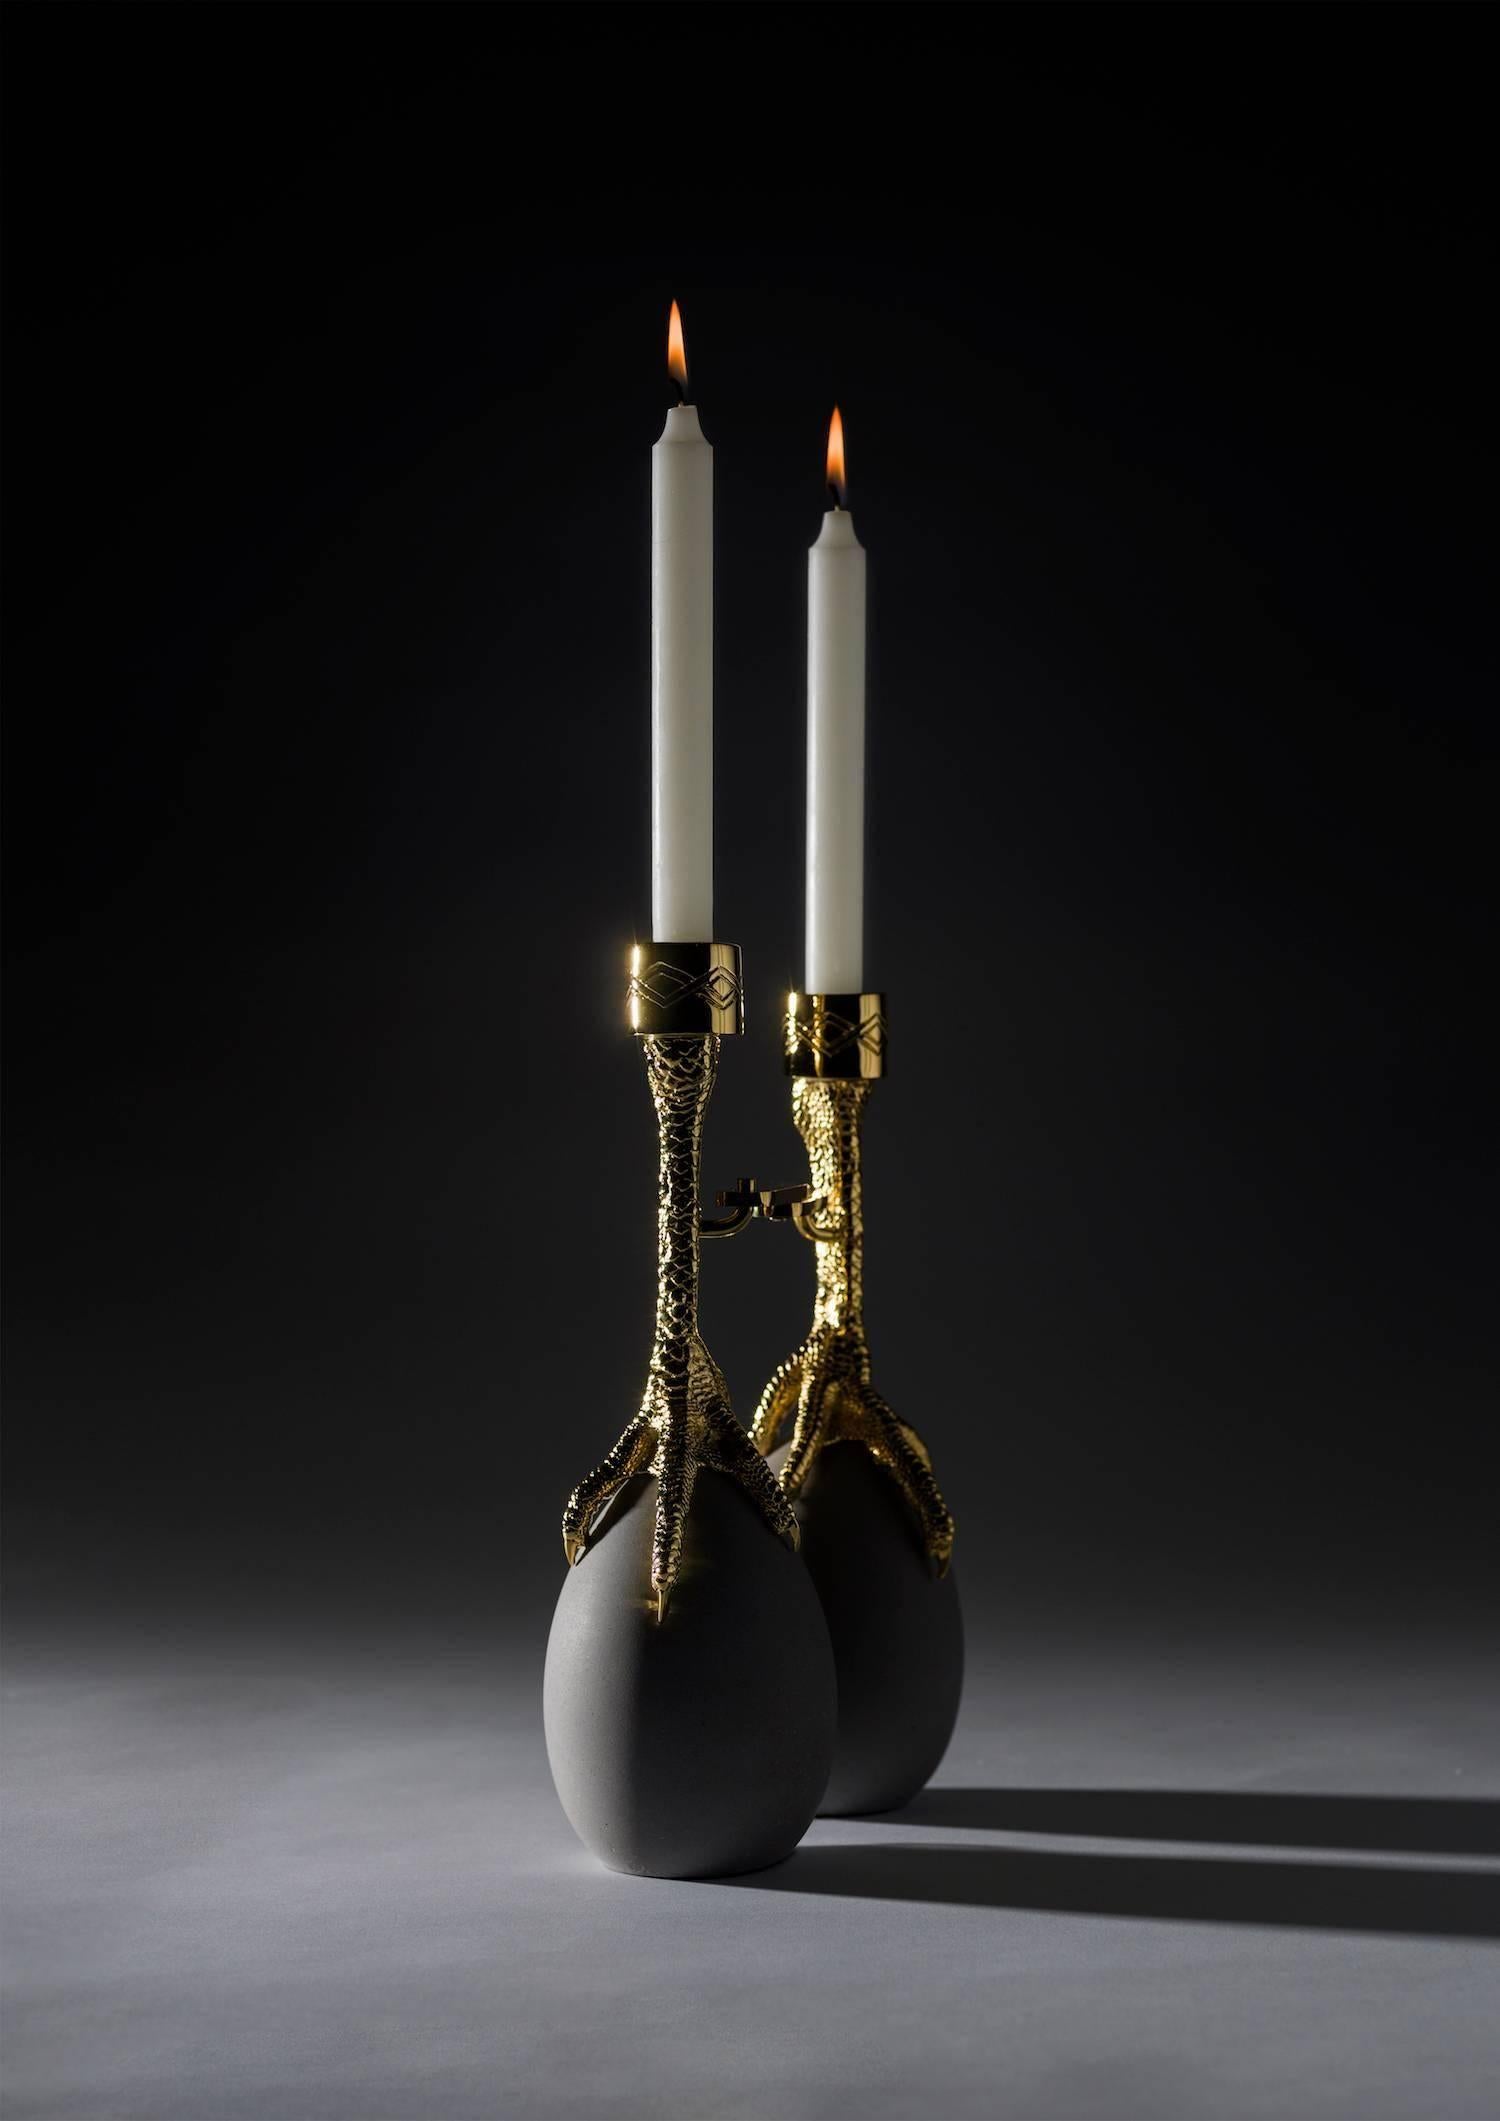 Walking hen candleholder by Aisha Al Sowaidi for BD Art Editions
 
Limited edition of eight units and two artist proofs and two prototypes.

Claws in cast brass and hinges in steel - both in a 24-carat gold-plated finish. Eggs are in concrete.
